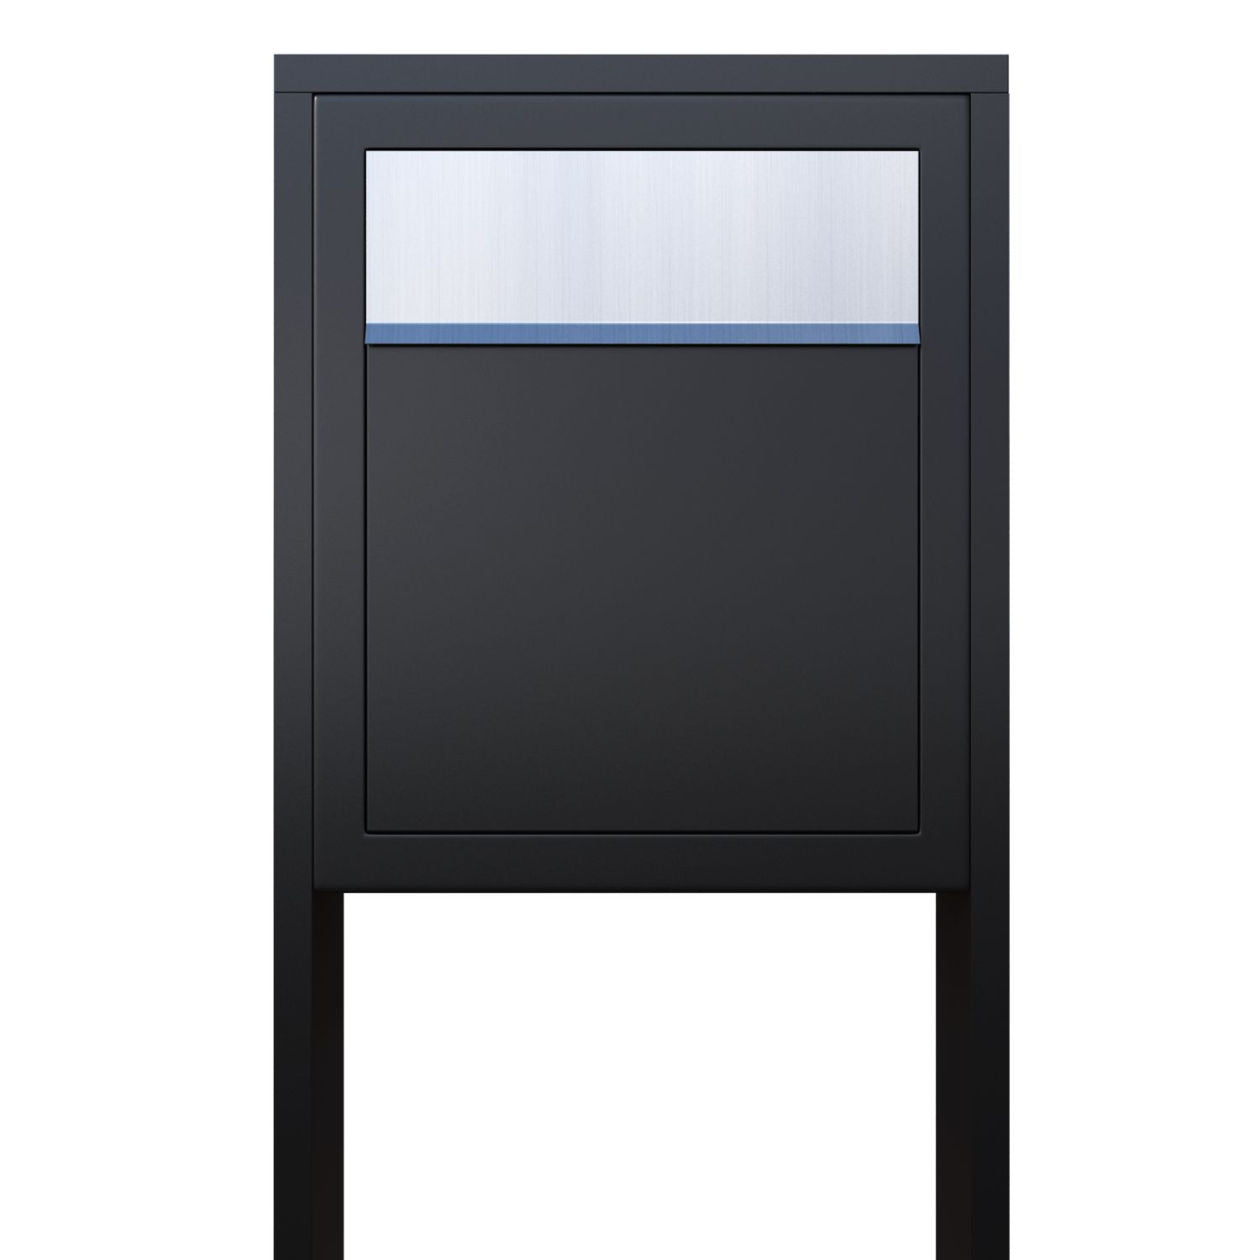 PROFILE 1 Standalone - Post-mounted locking stainless steel mailbox